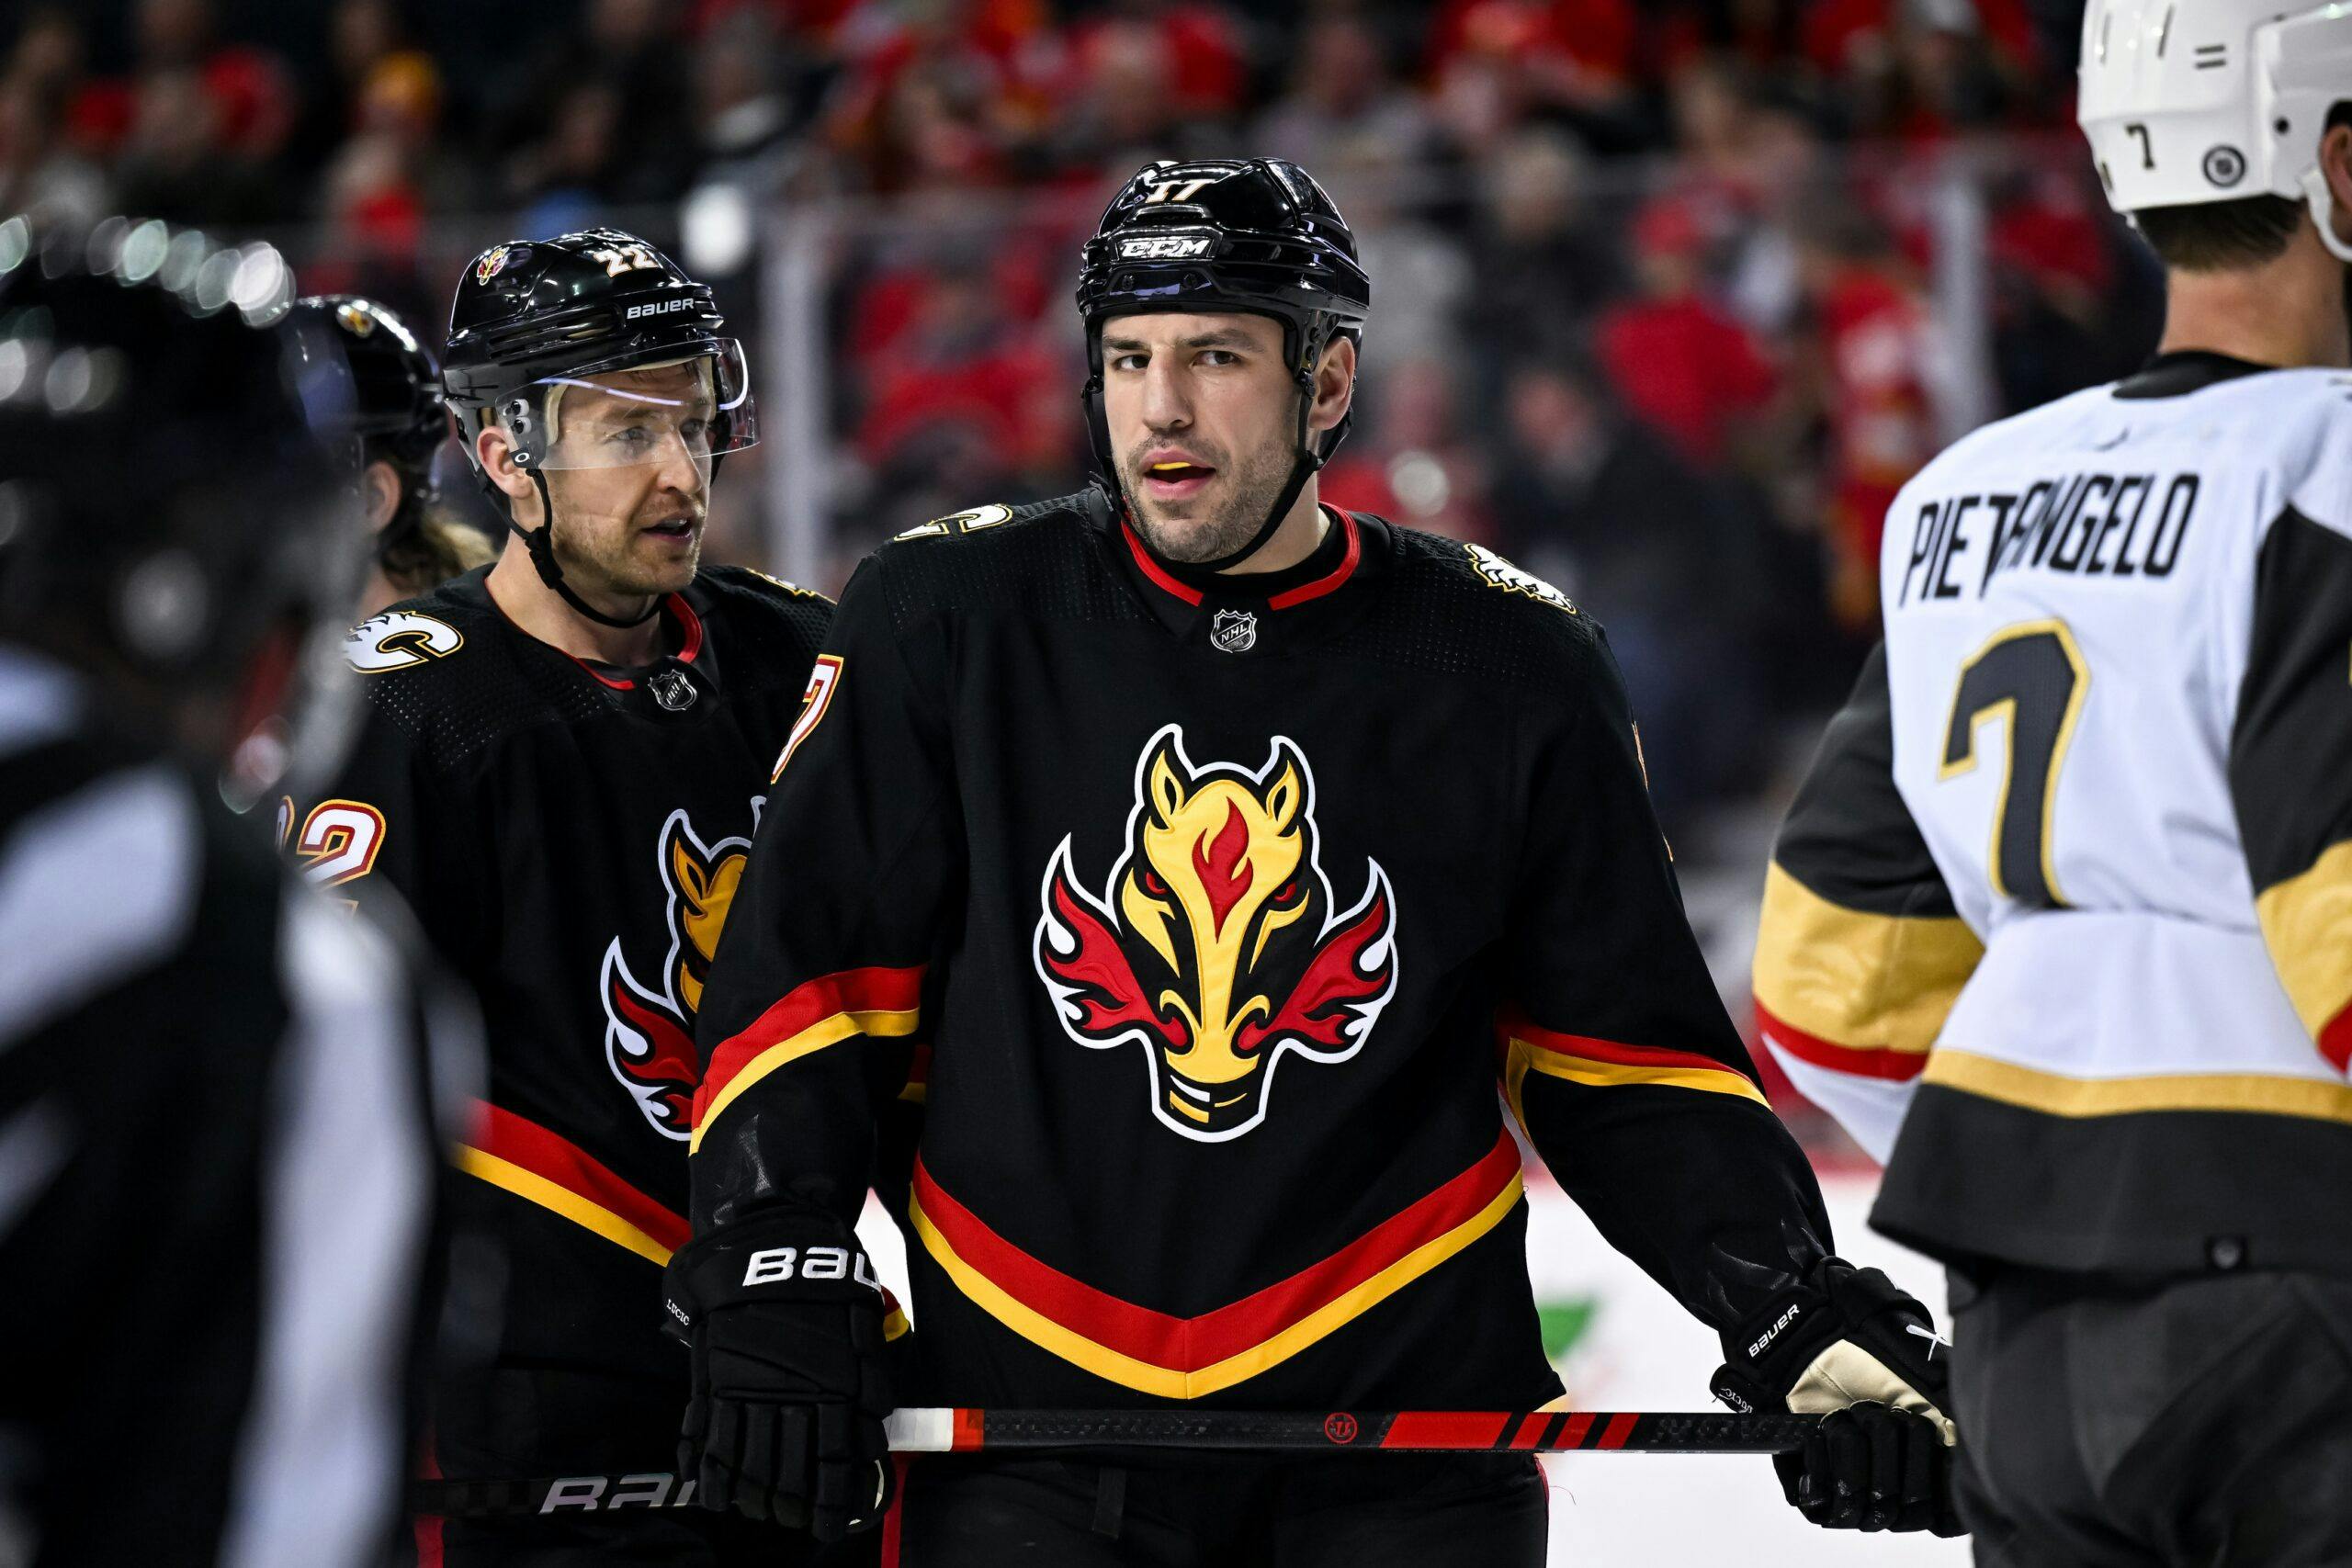 Back in black: Breaking down the Flames' return to the Blasty